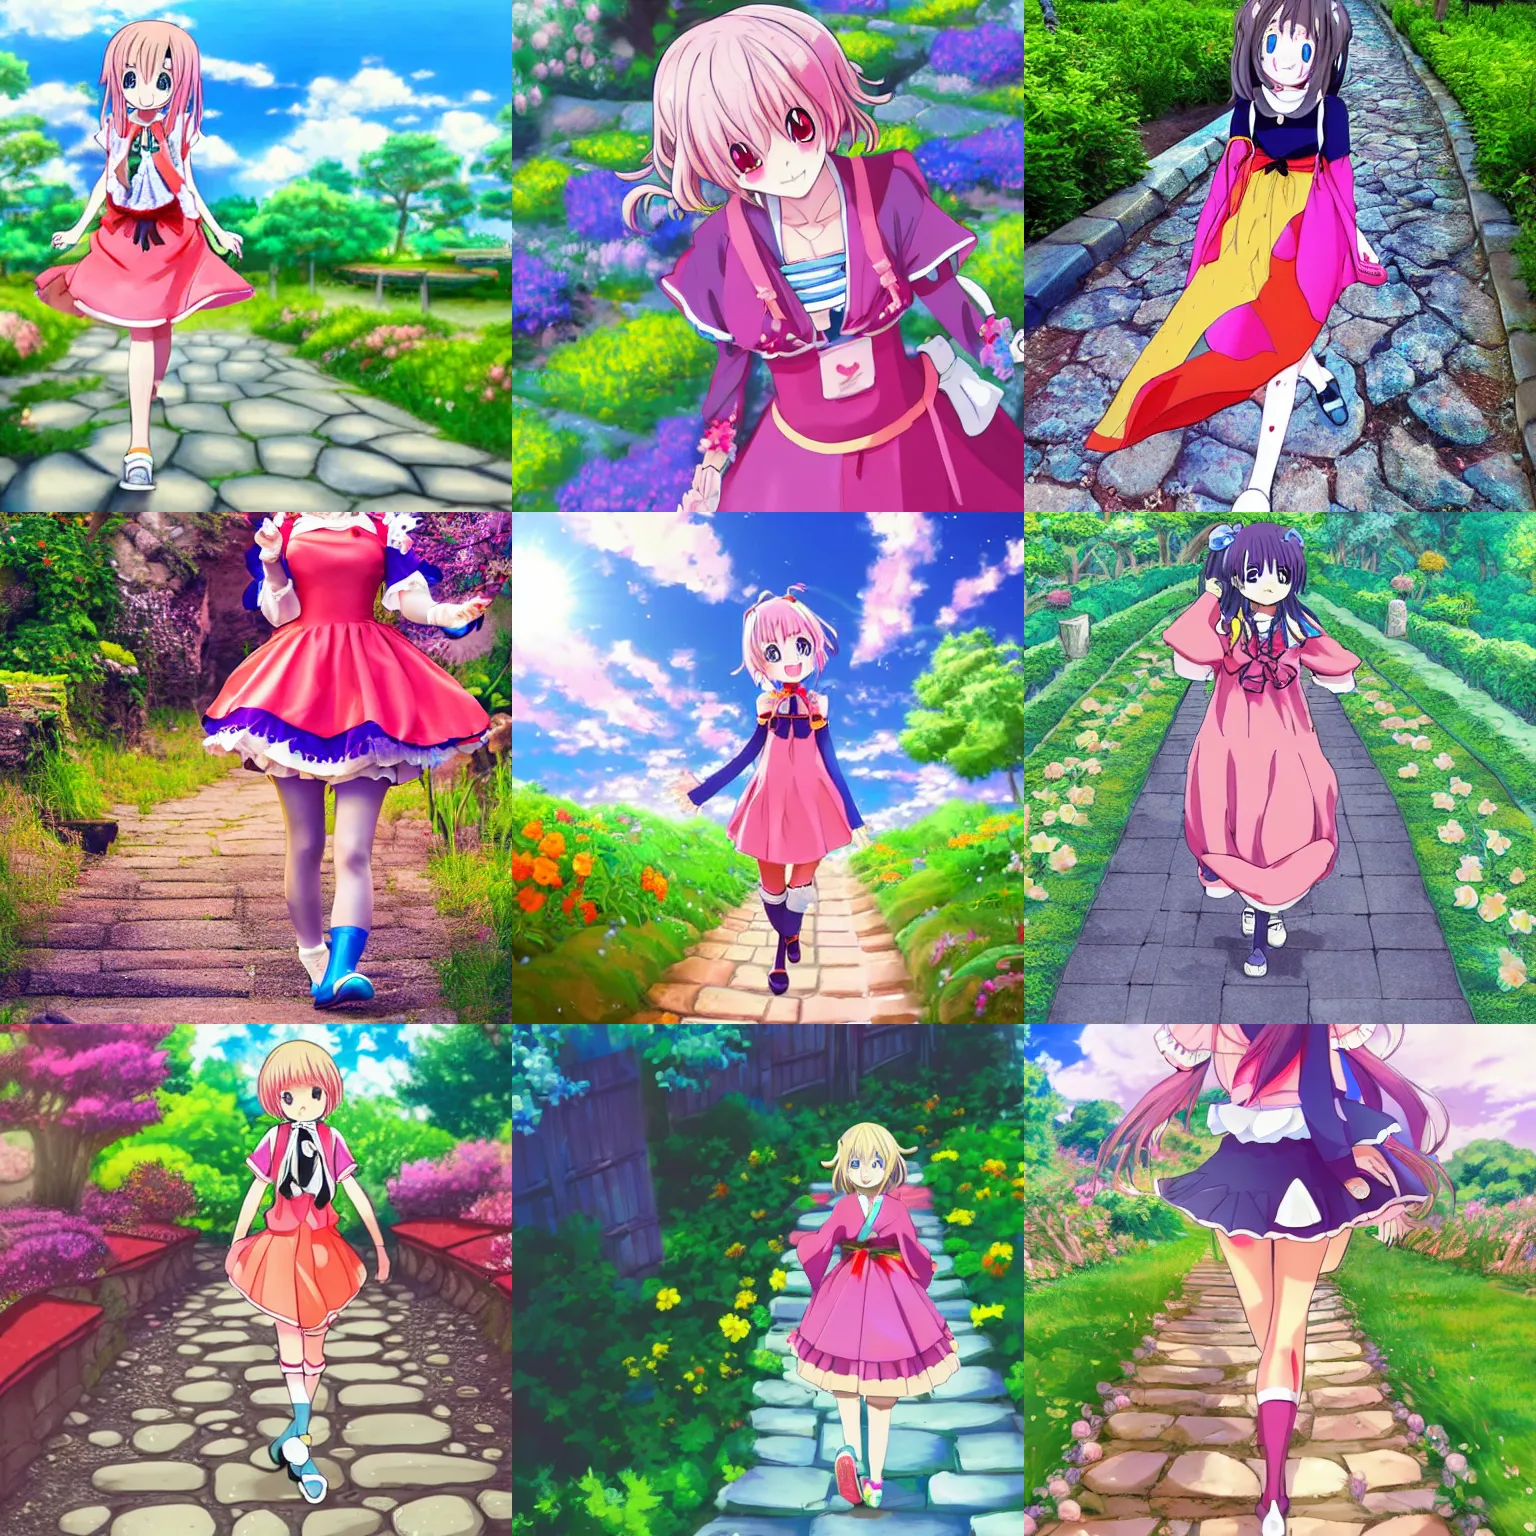 Prompt: a very cute art of a smiling anime girl idol wearing a colorful dress, walking on a stone path at the garden, walking over a skeleton, in the style of anime